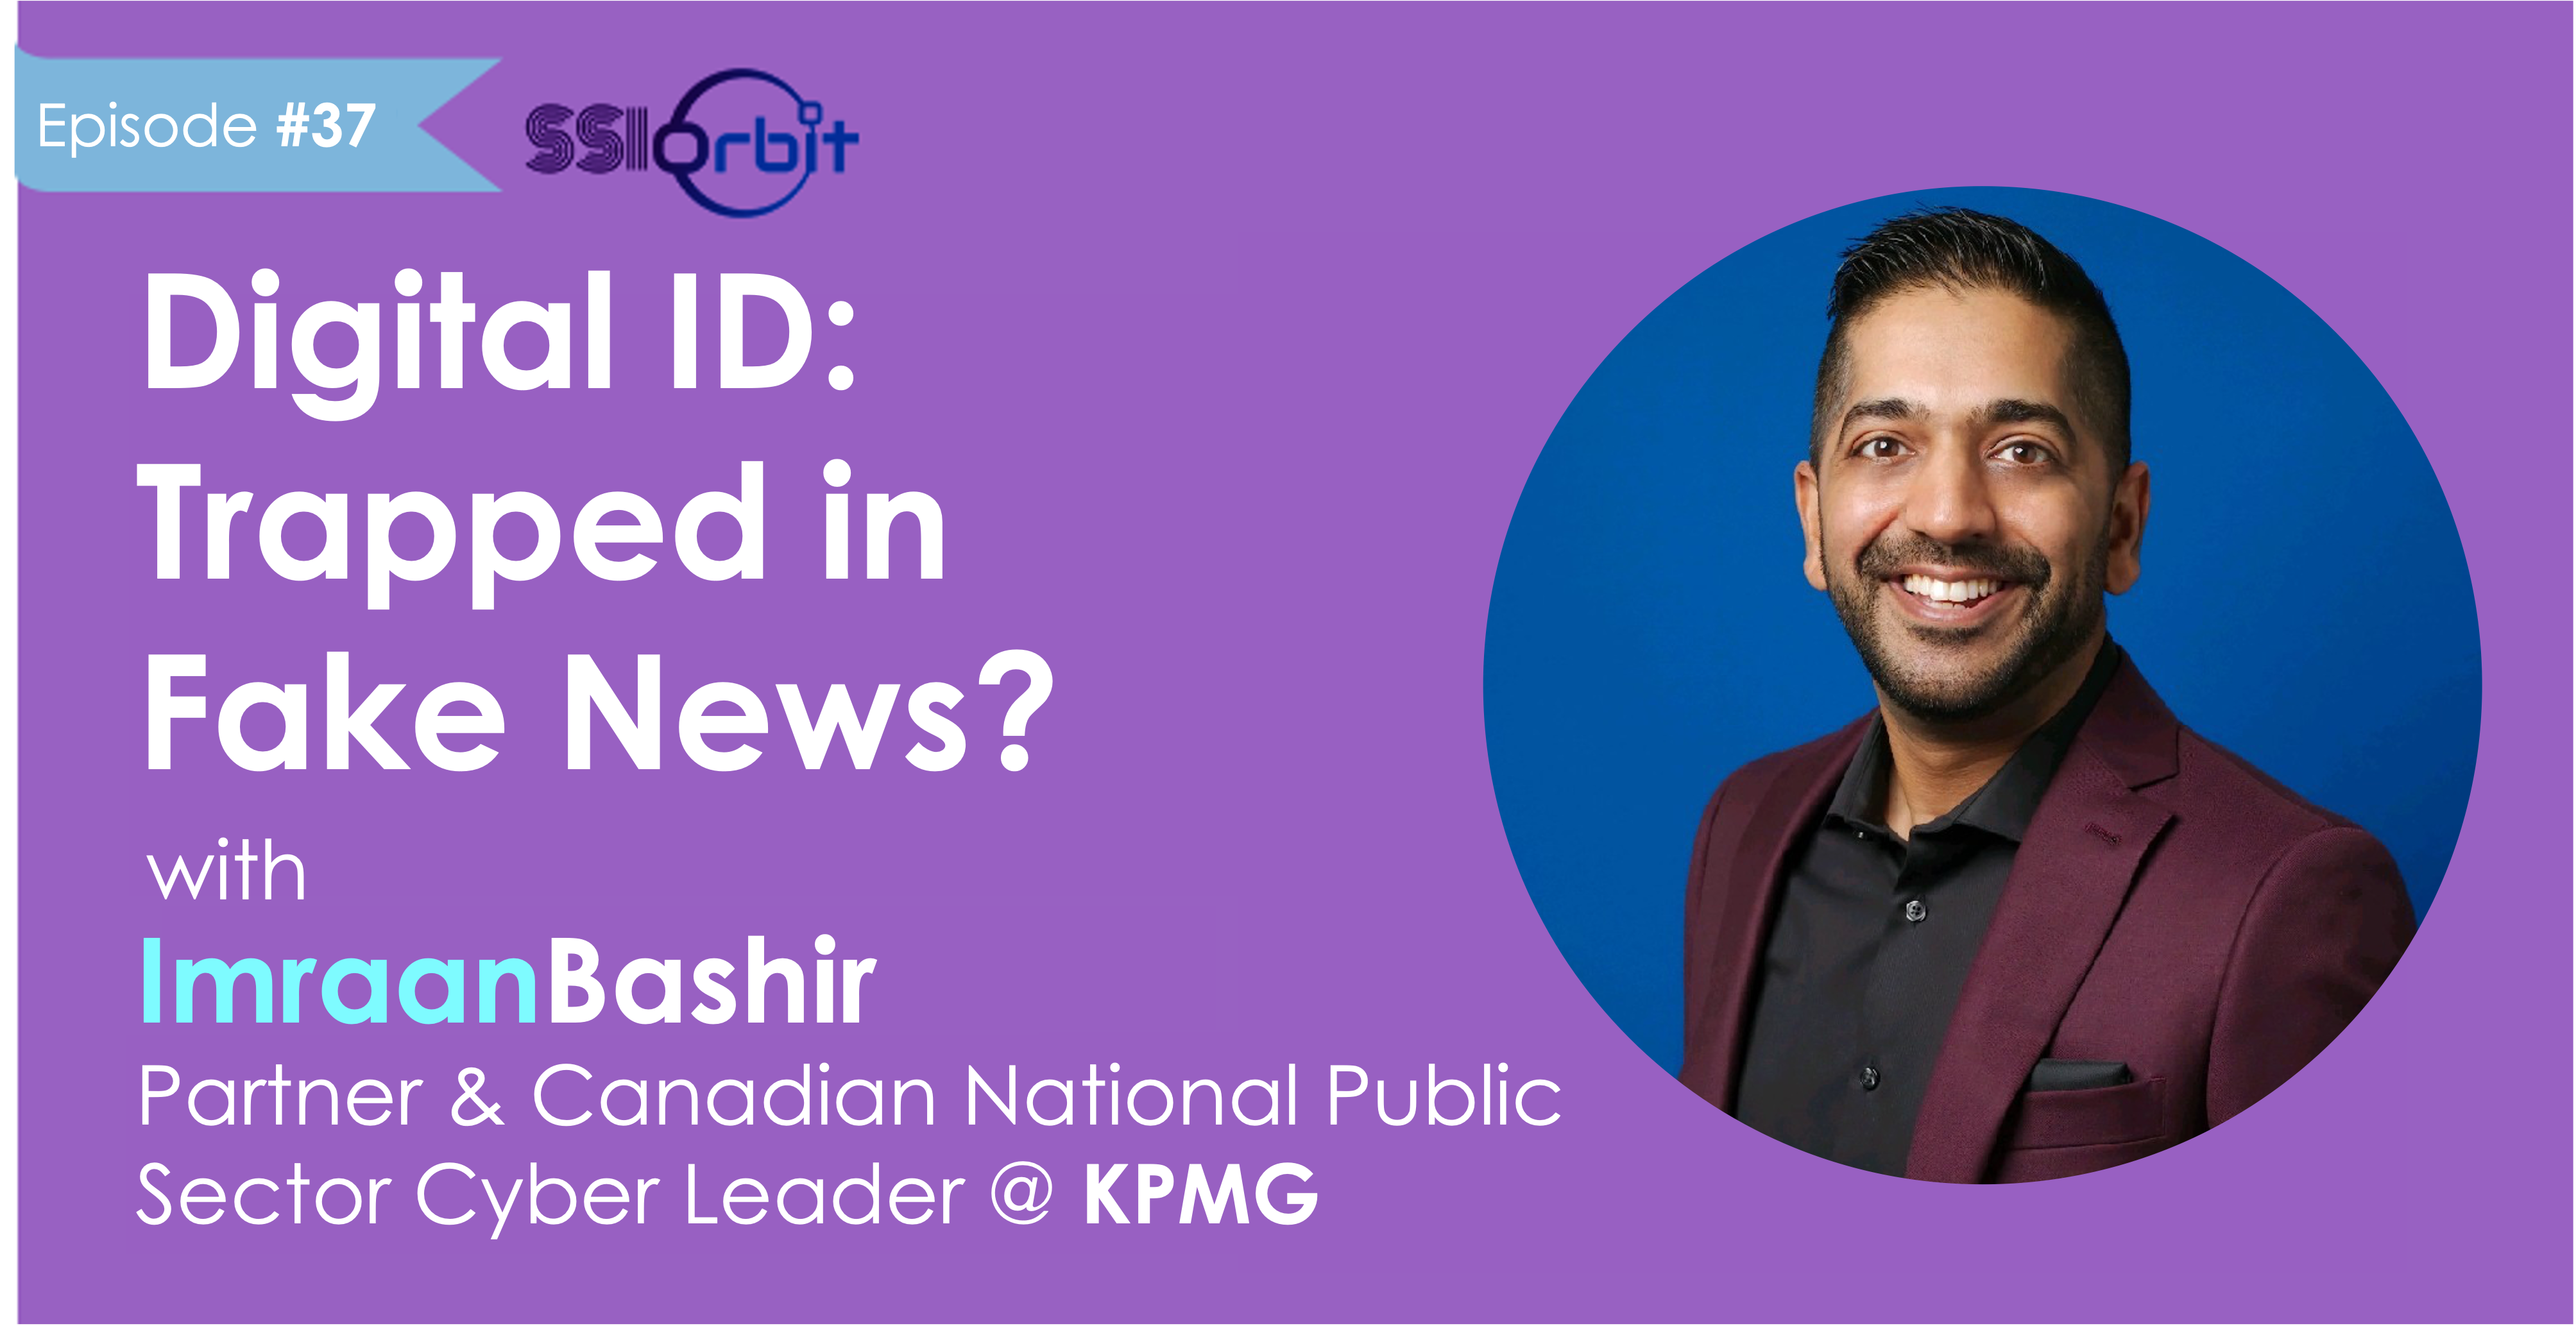 Digital ID: Trapped in Fake News? (with Imraan Bashir)